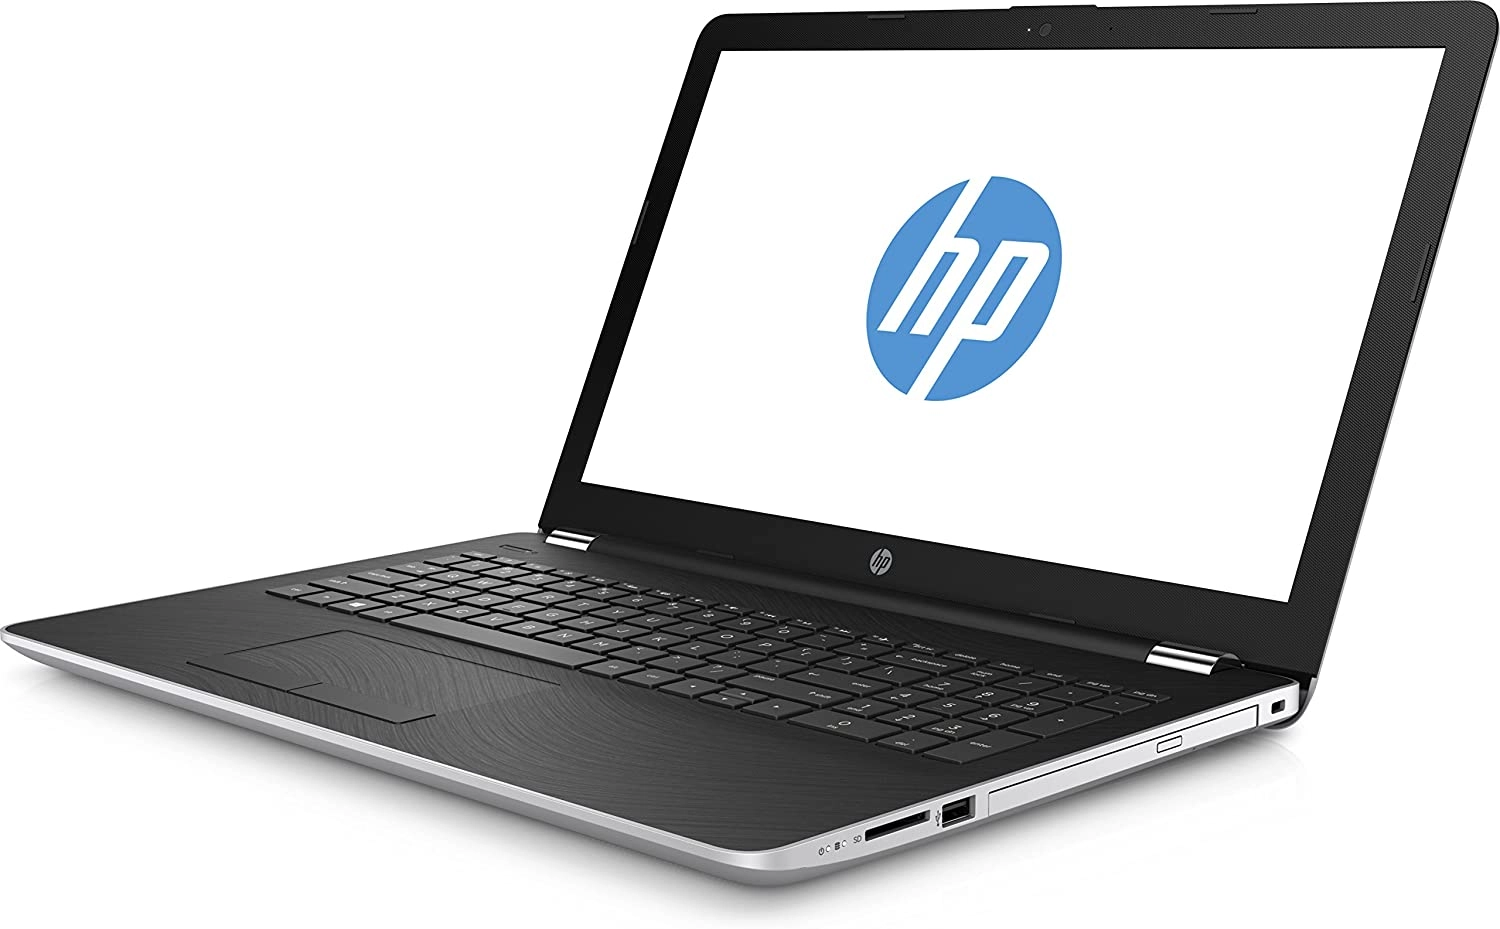 HP 15-bs125ns laptop image